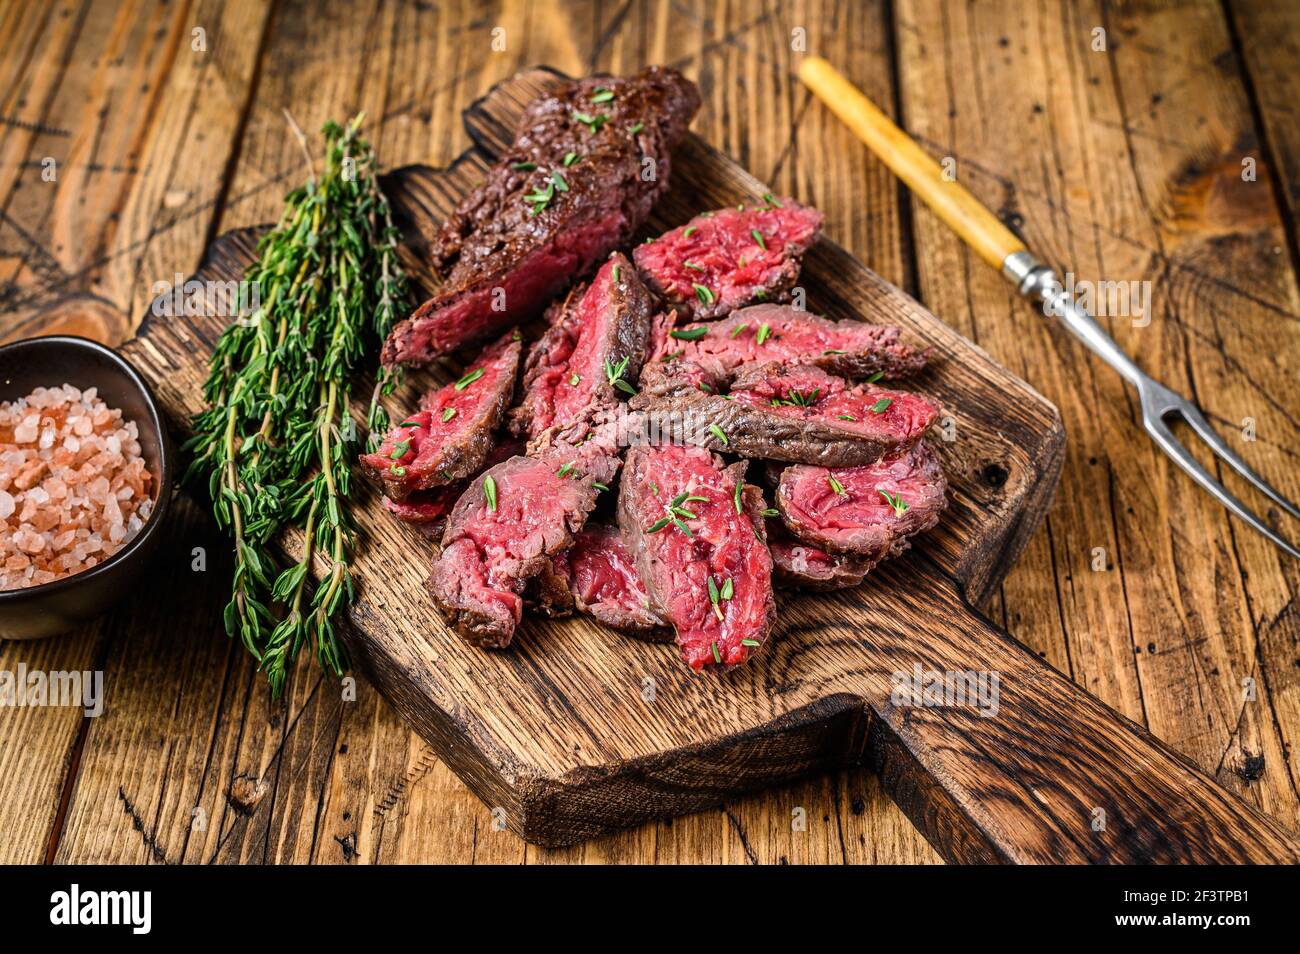 Sliced grilled machete skirt meat beef steak on a wooden cutting board. wooden background. Top view Stock Photo